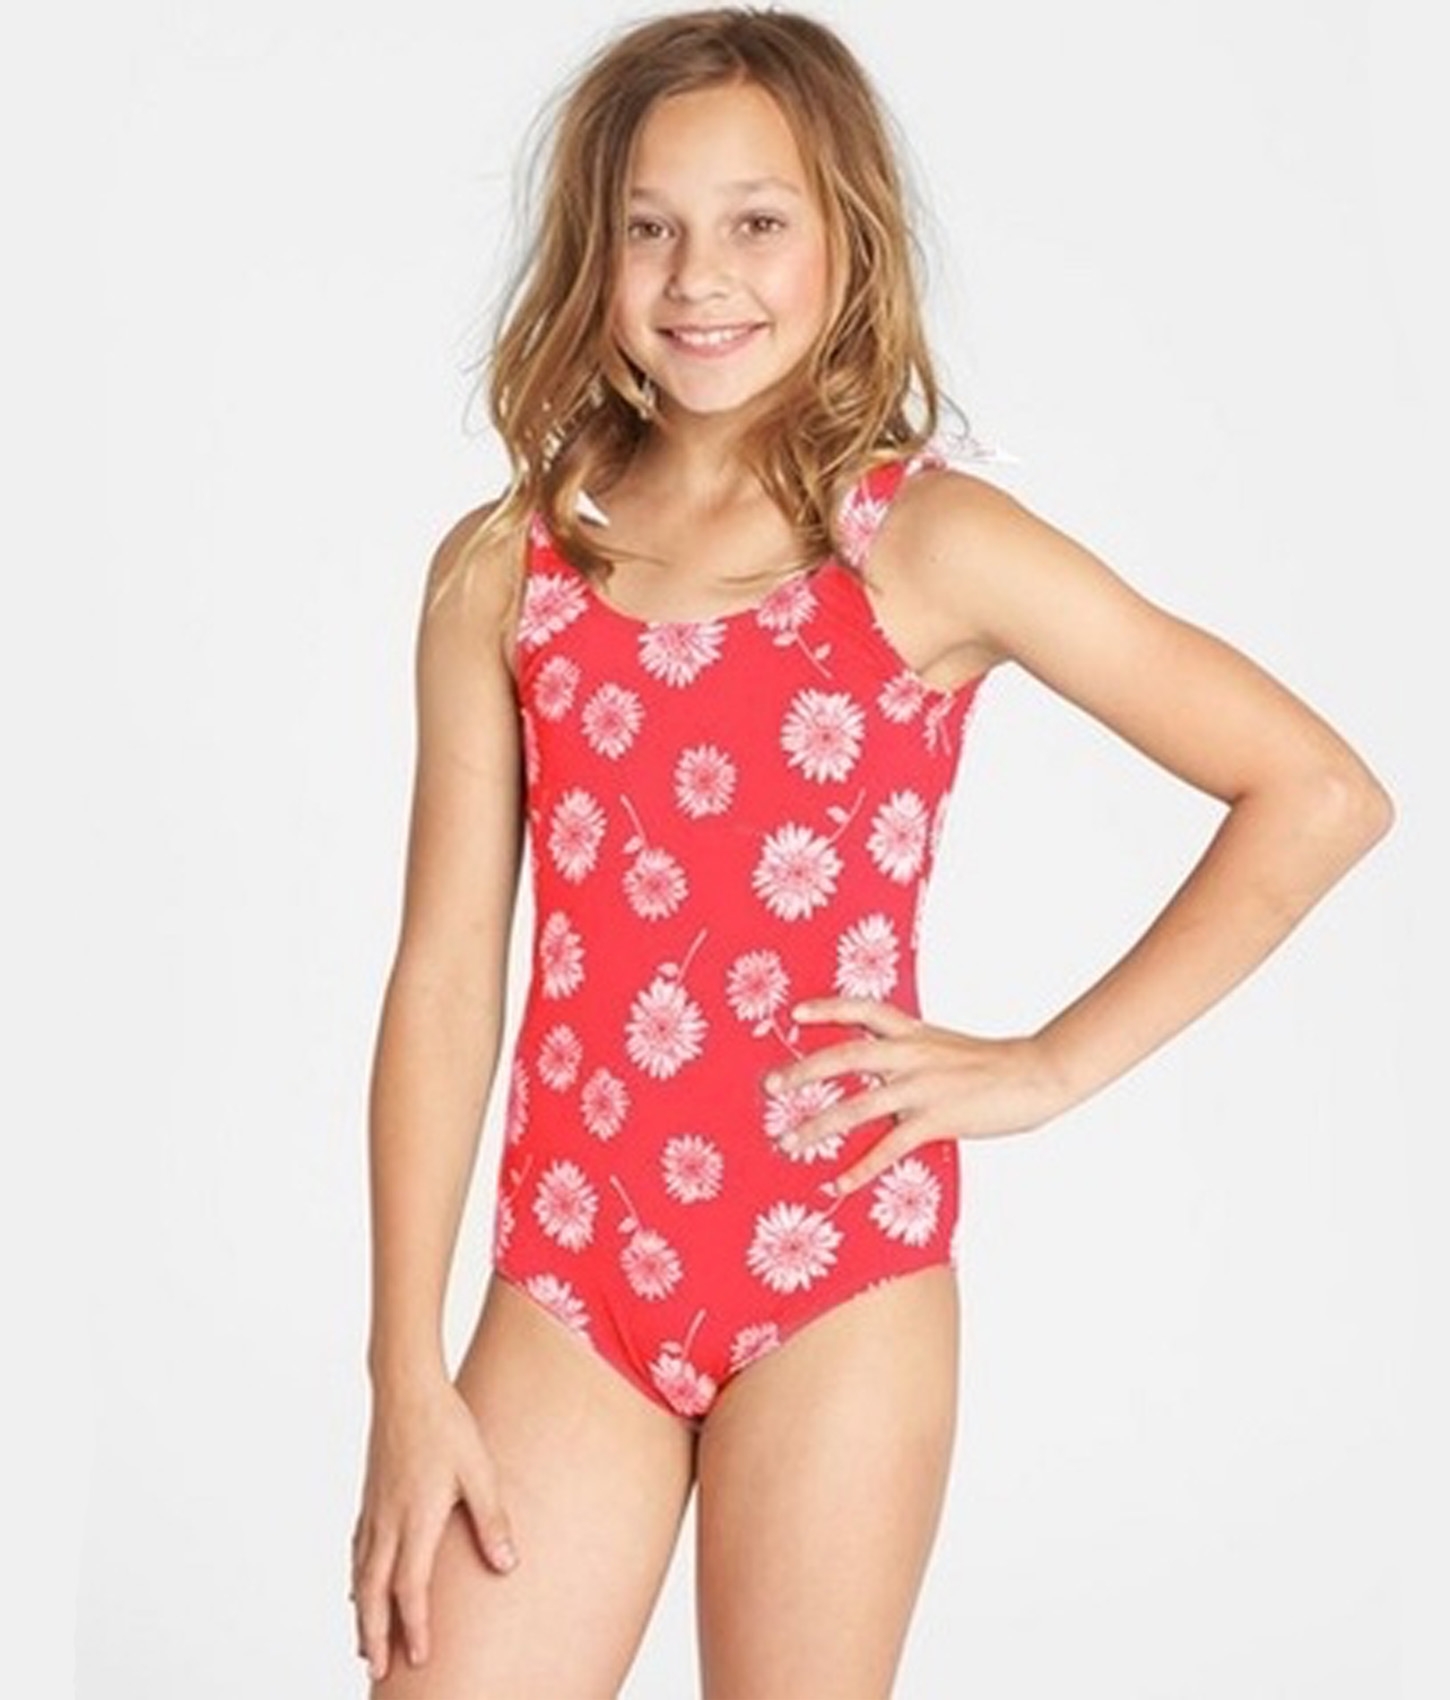 Daisy Day One Piece Swimsuit